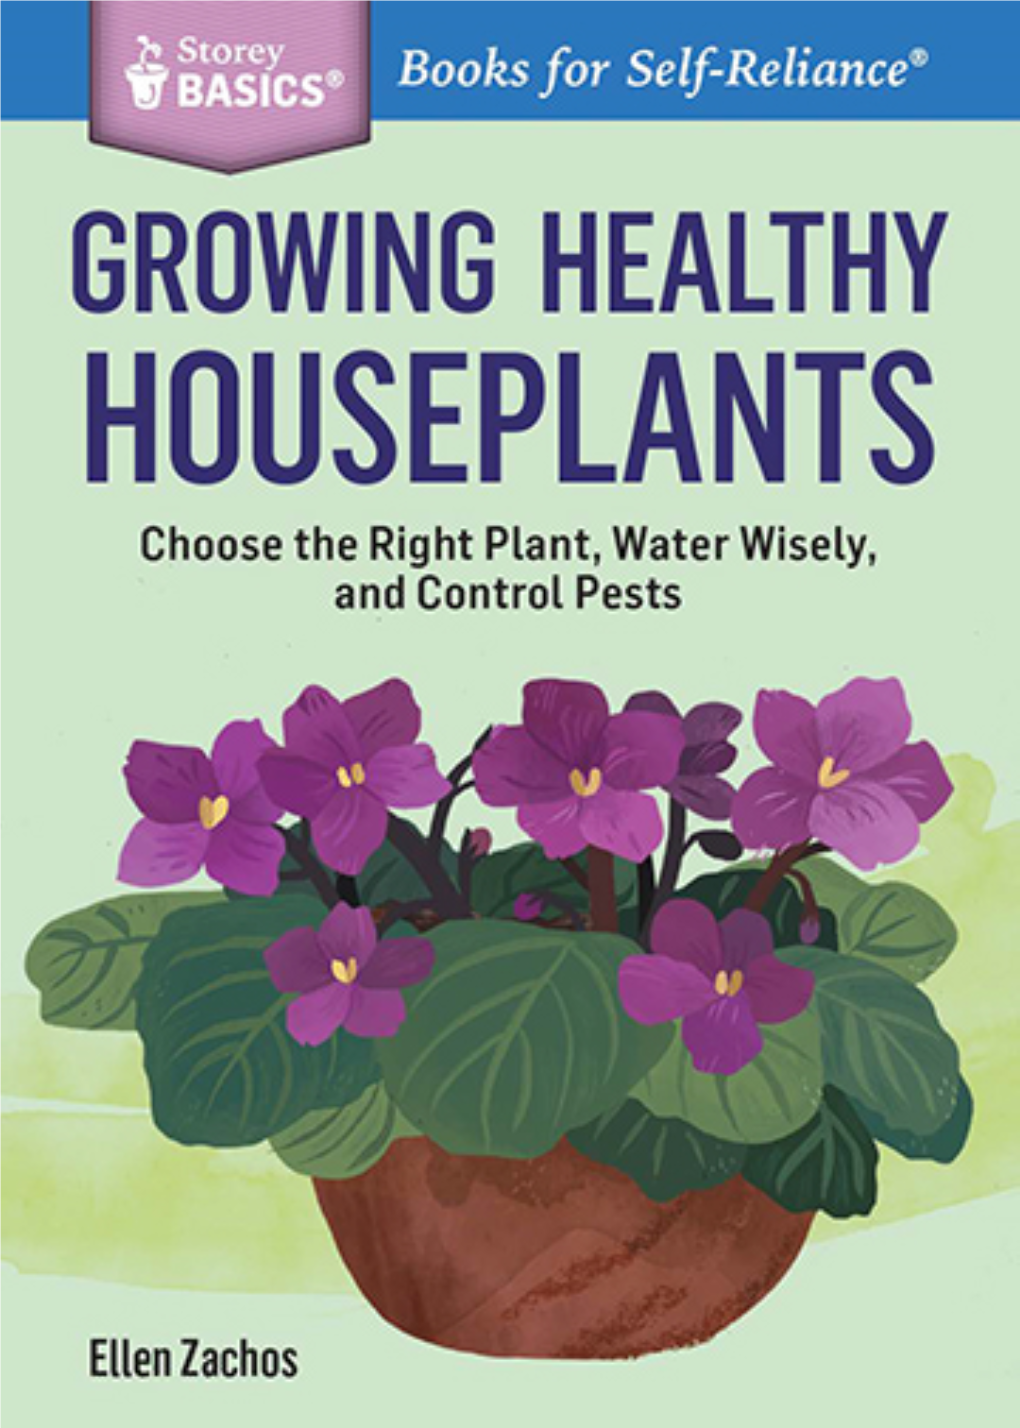 GROWING HEALTHY HOUSEPLANTS Choose the Right Plant, Water Wisely, and Control Pests